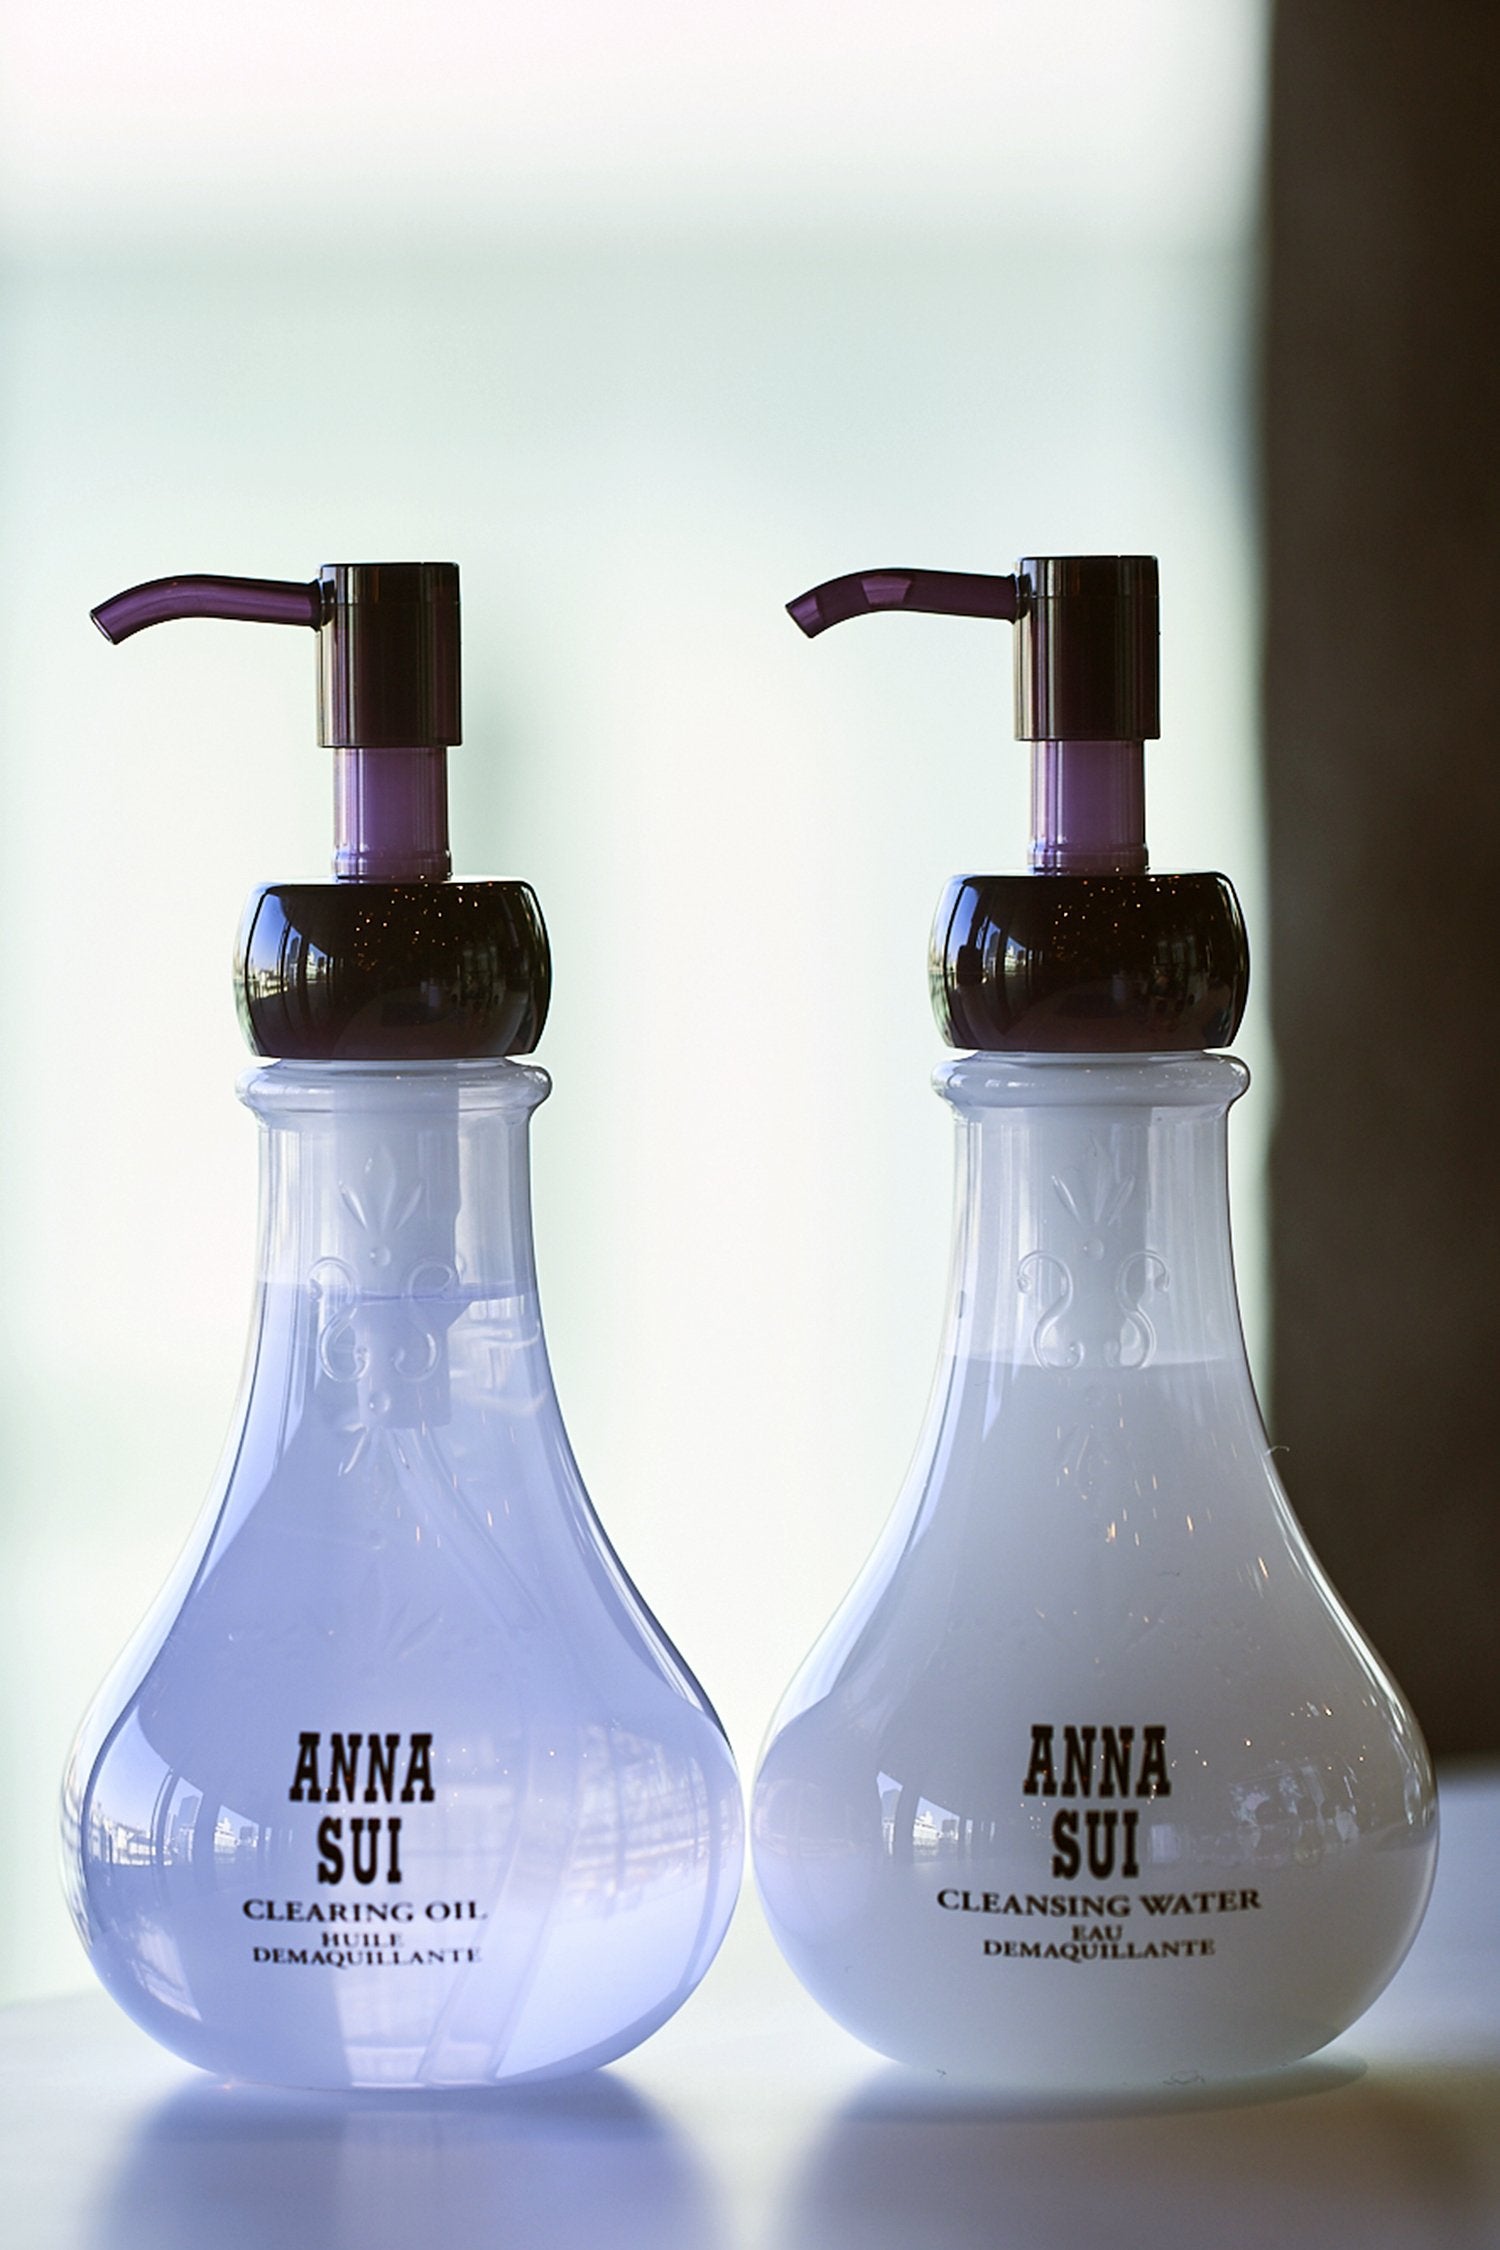 2-bulb-shaped container, floral design & Anna branding, the dispenser is dark purple, 1 water, 1 oil